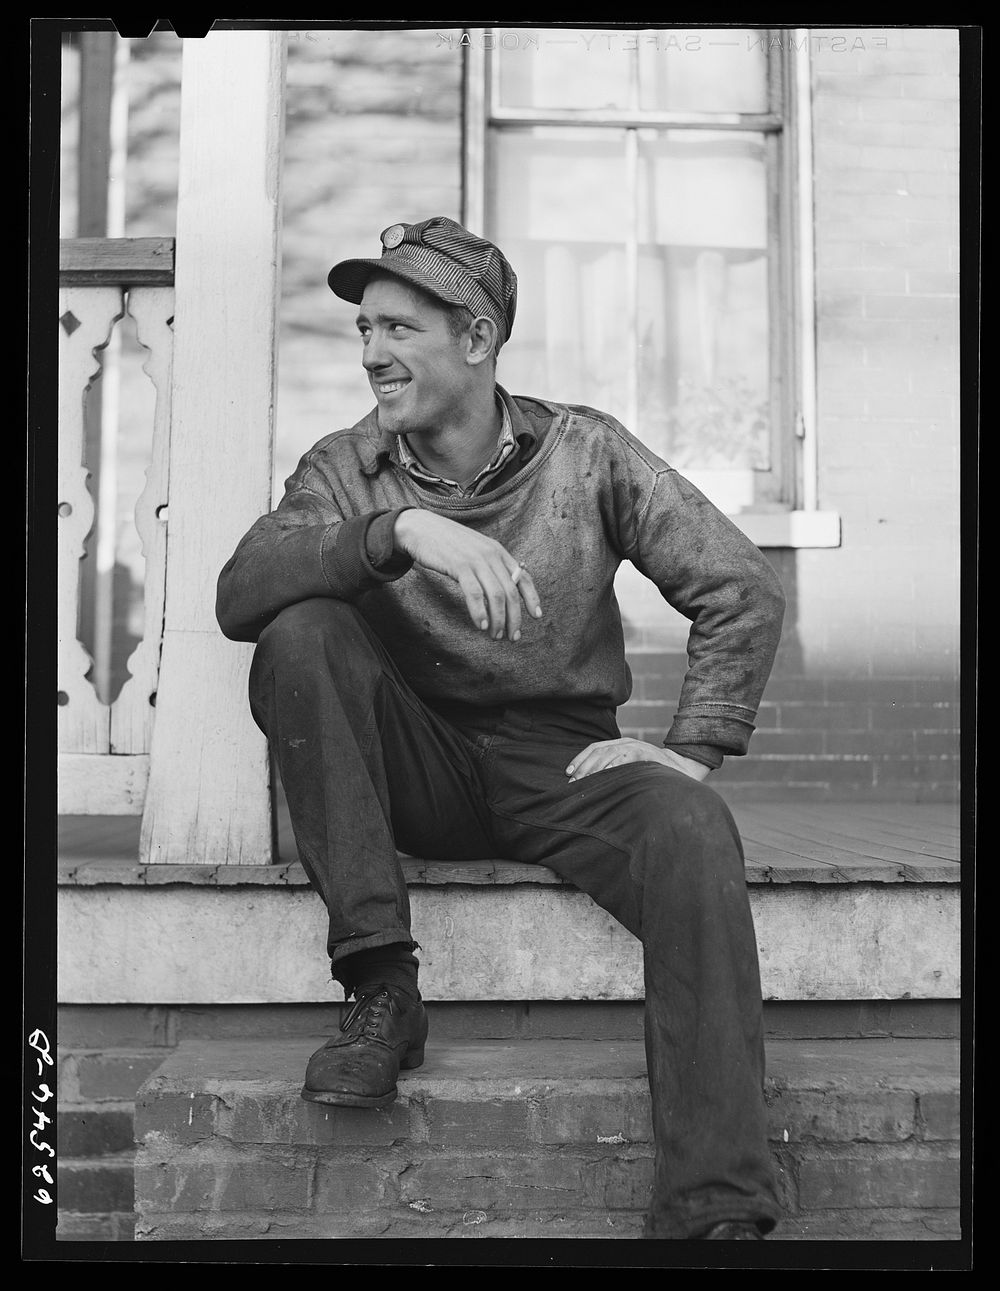 Defense worker. Norfolk, Virginia. Sourced from the Library of Congress.